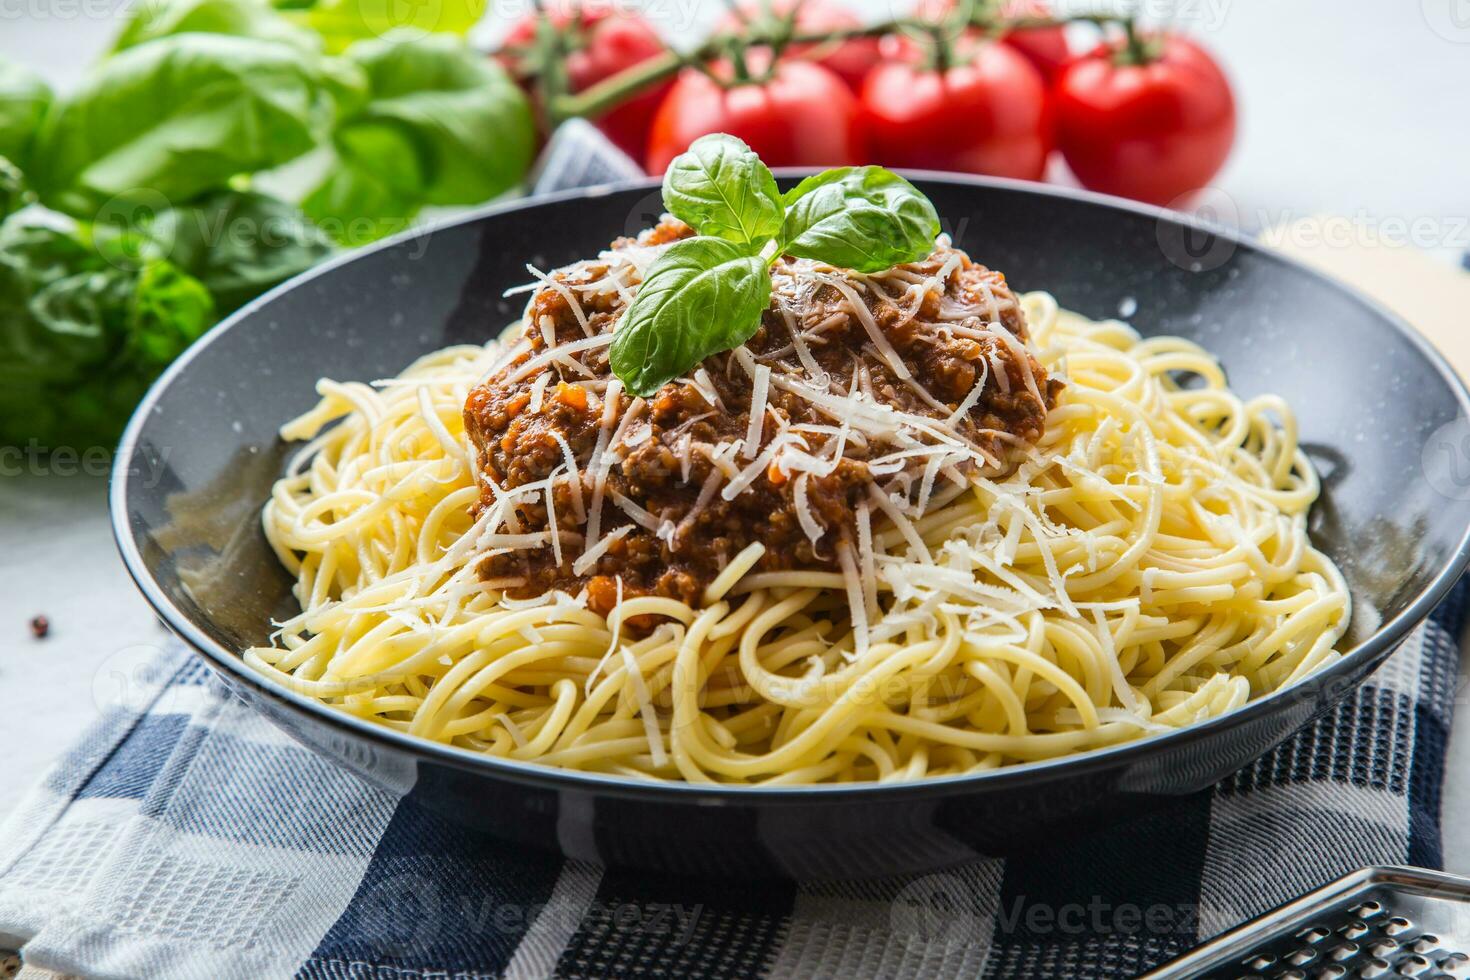 Spaghetti Bolognese. Pasta spaghetti Bolognese with basil and decoration in restaurant or home photo